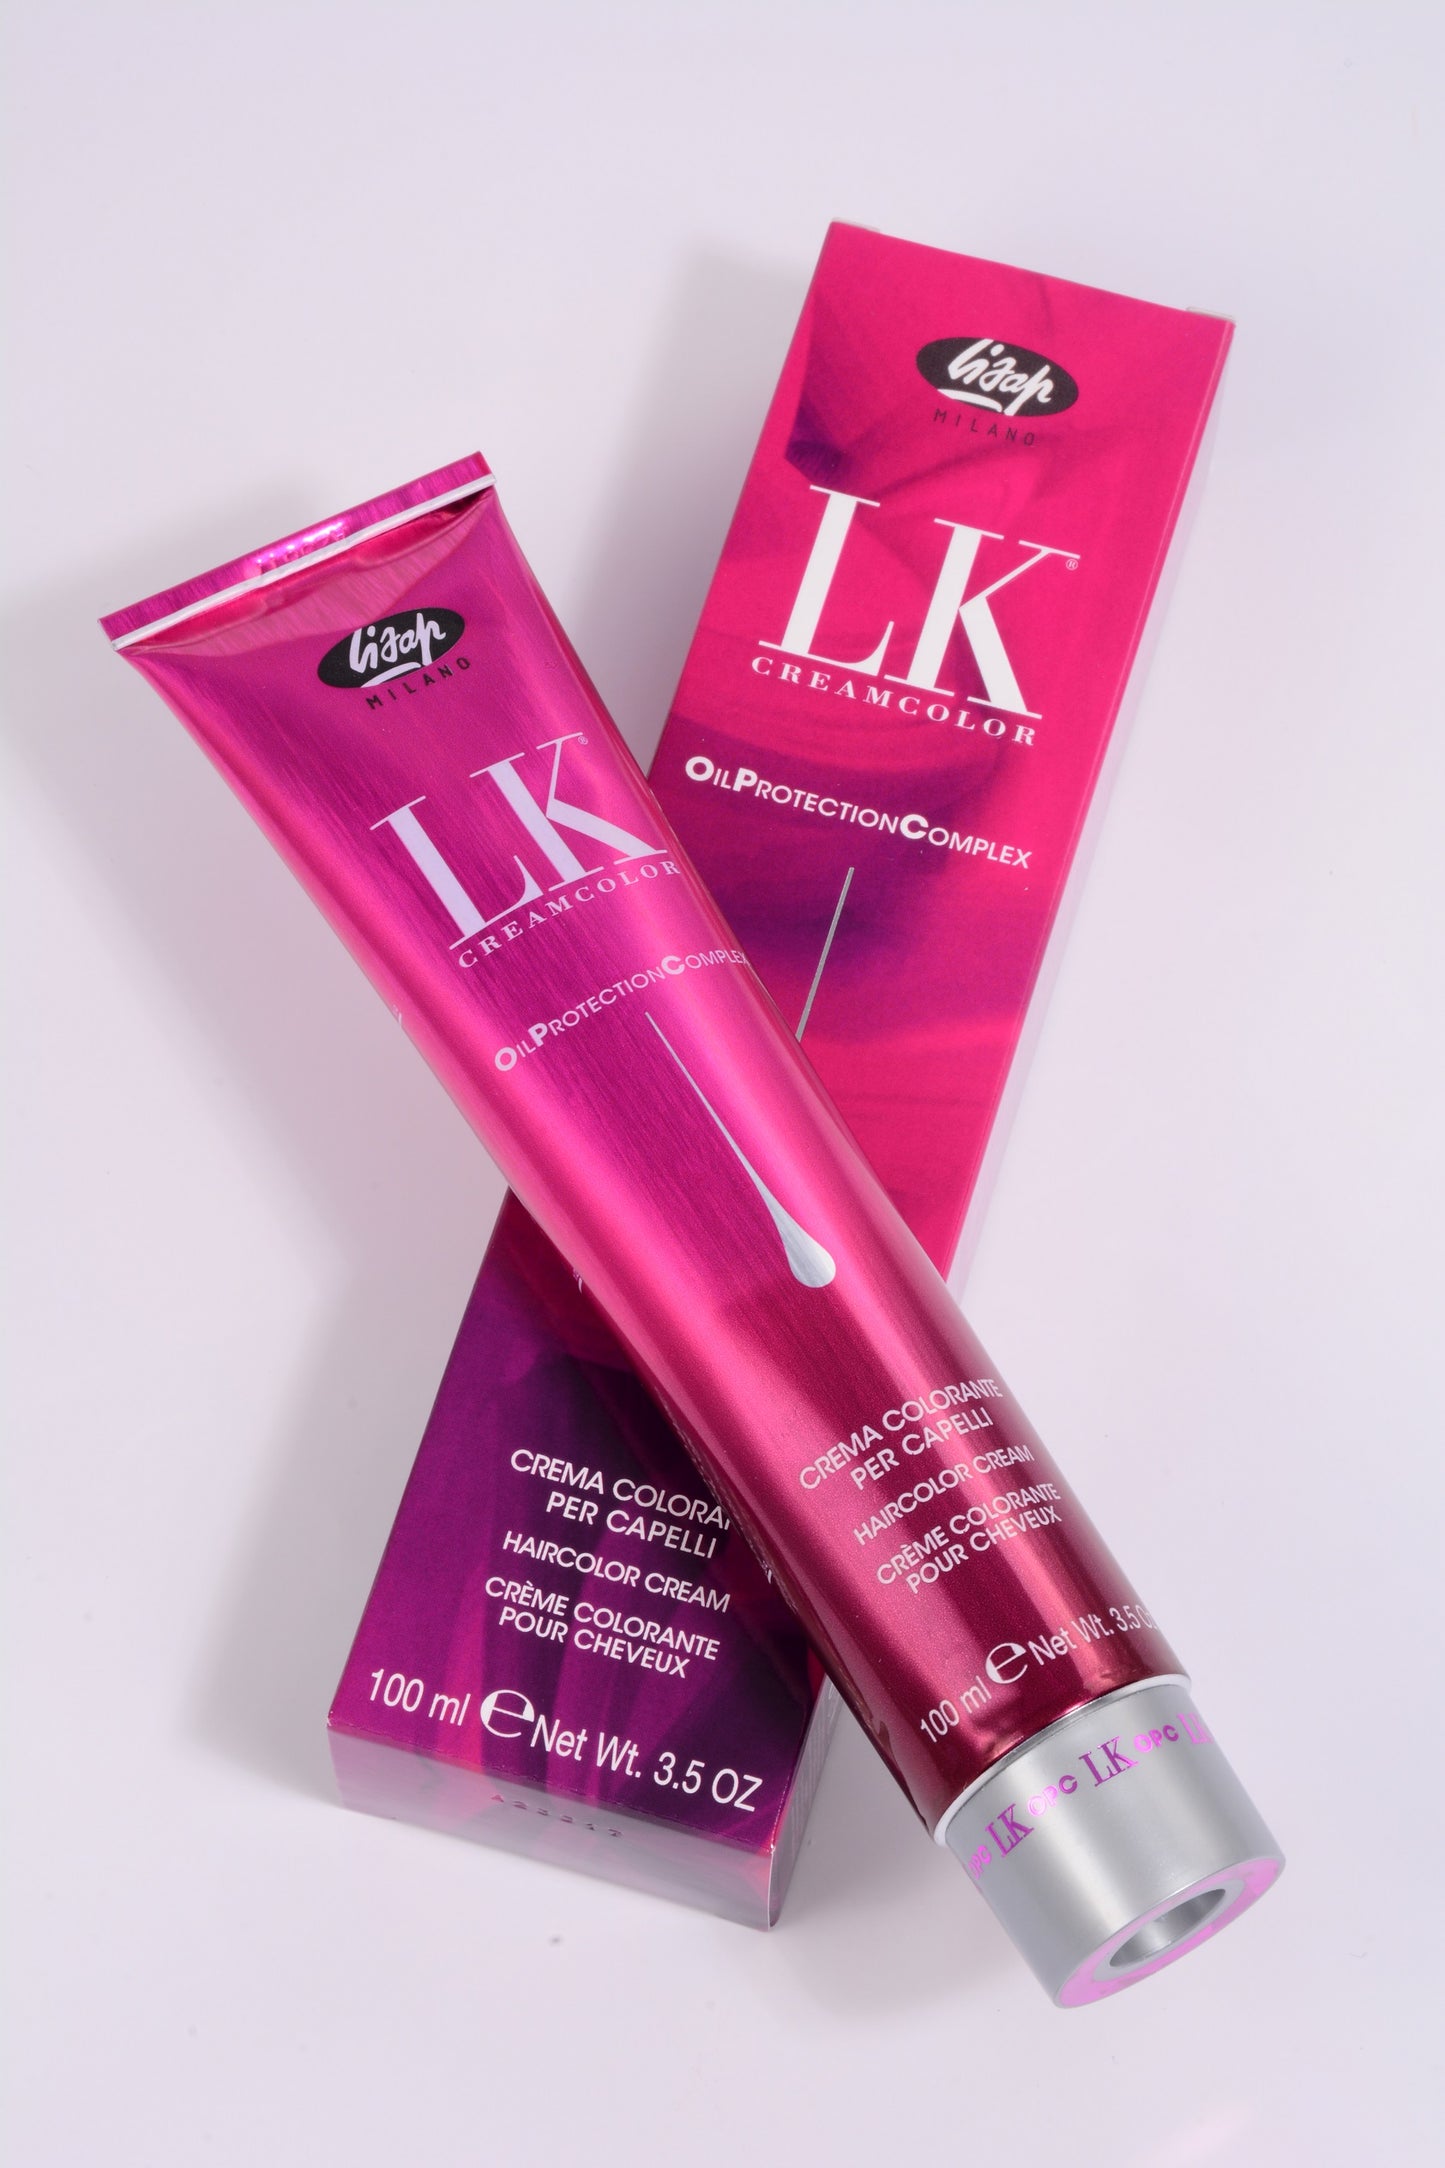 LK Creamcolor 8/72 Oil Protection Complex